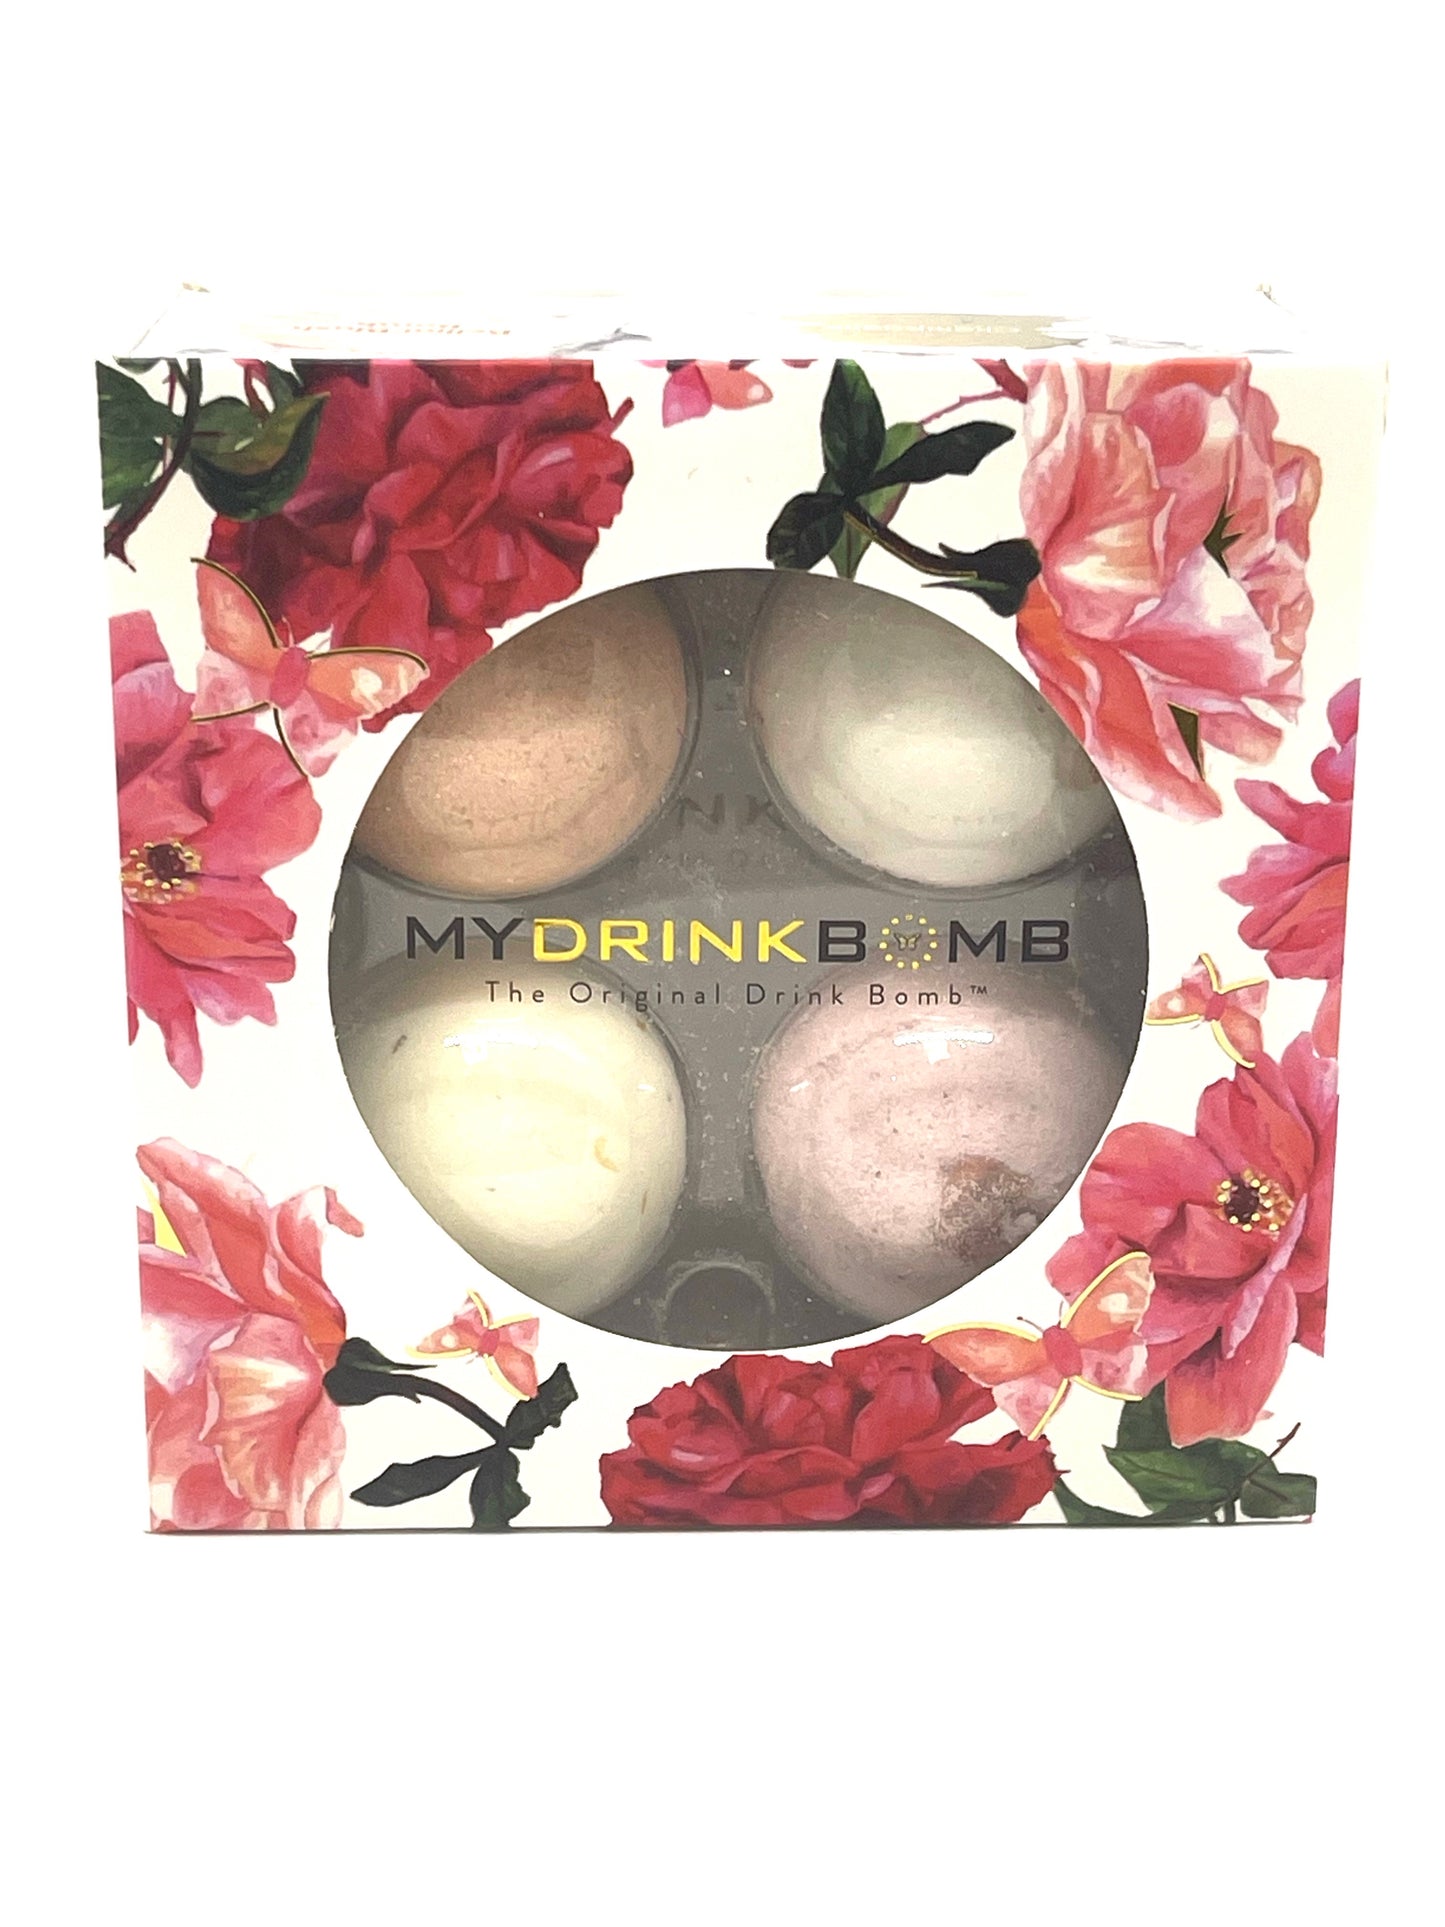 My Drink Bomb Bomb Four Pack Drink Bomb Mixes are back with a NEW look!